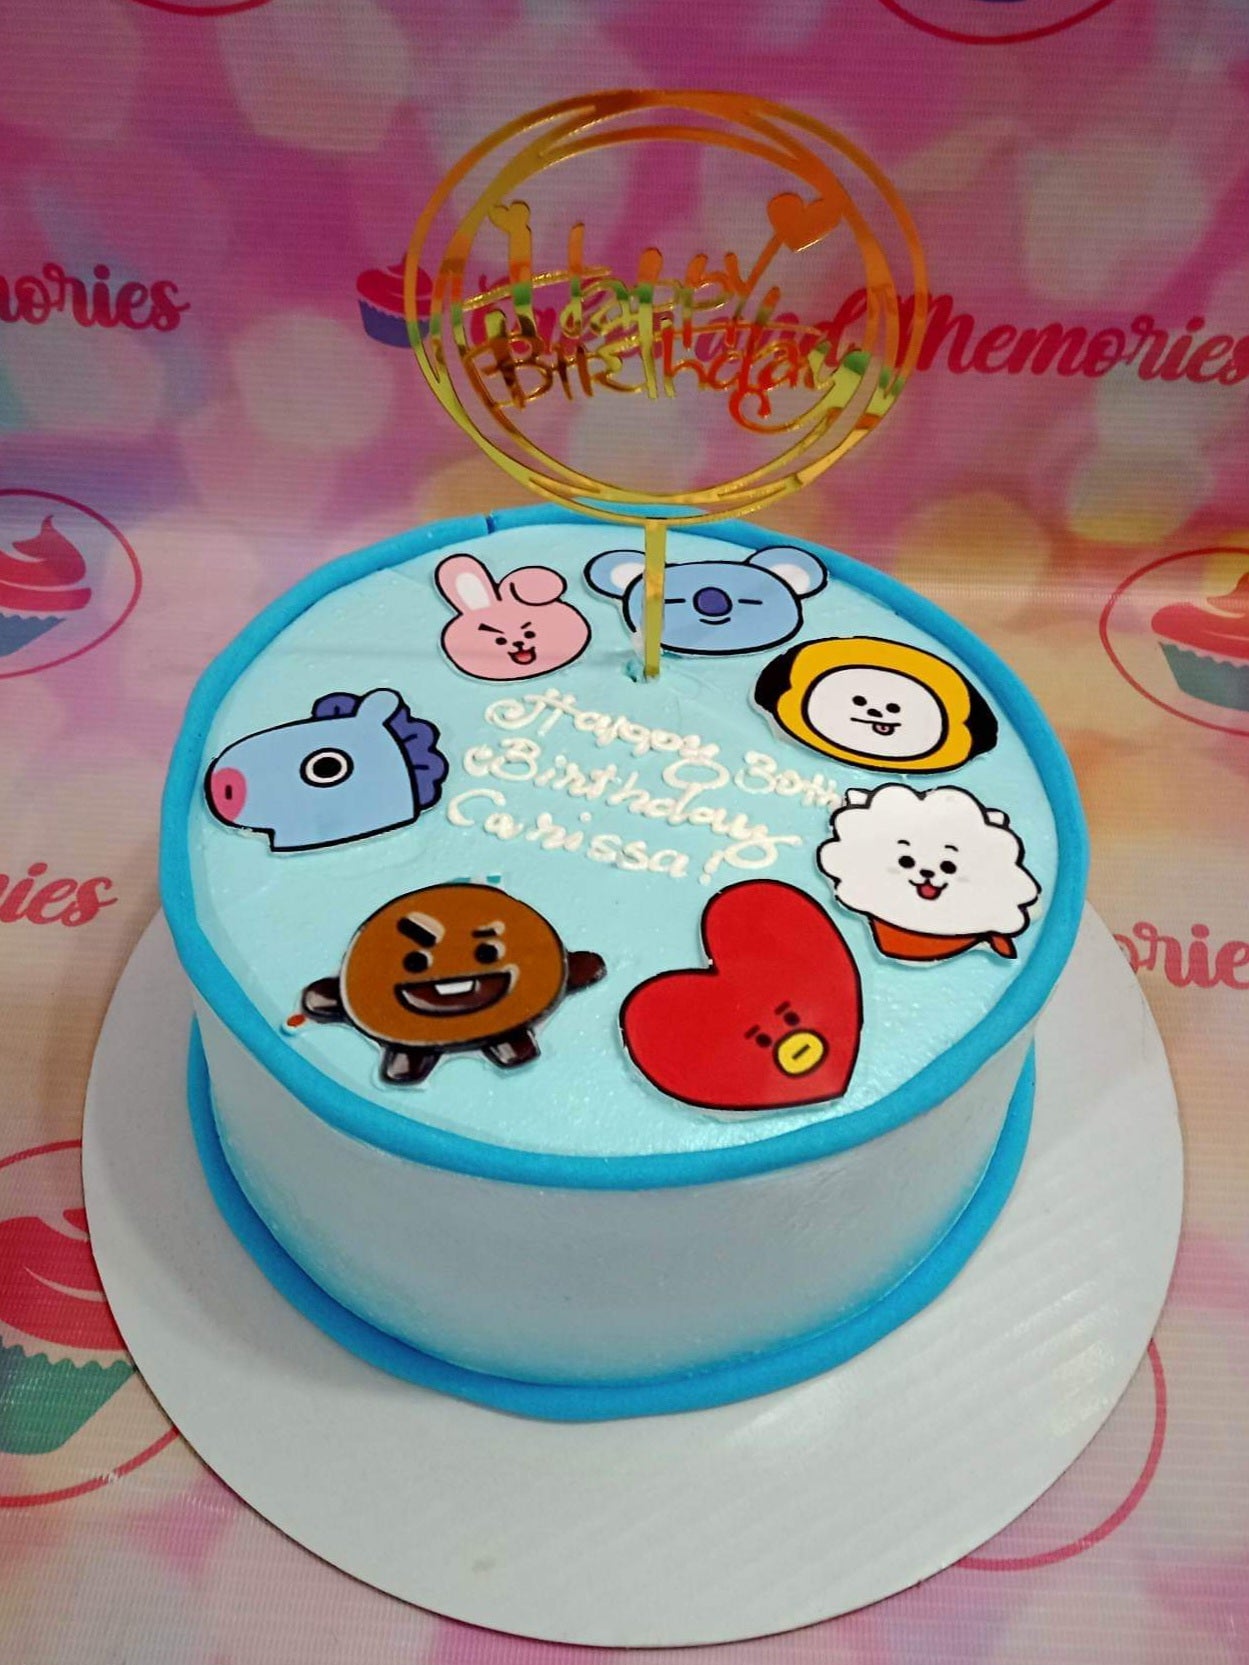 Goldilocks BT21 Butter Cakes: How To Order, Price, Designs